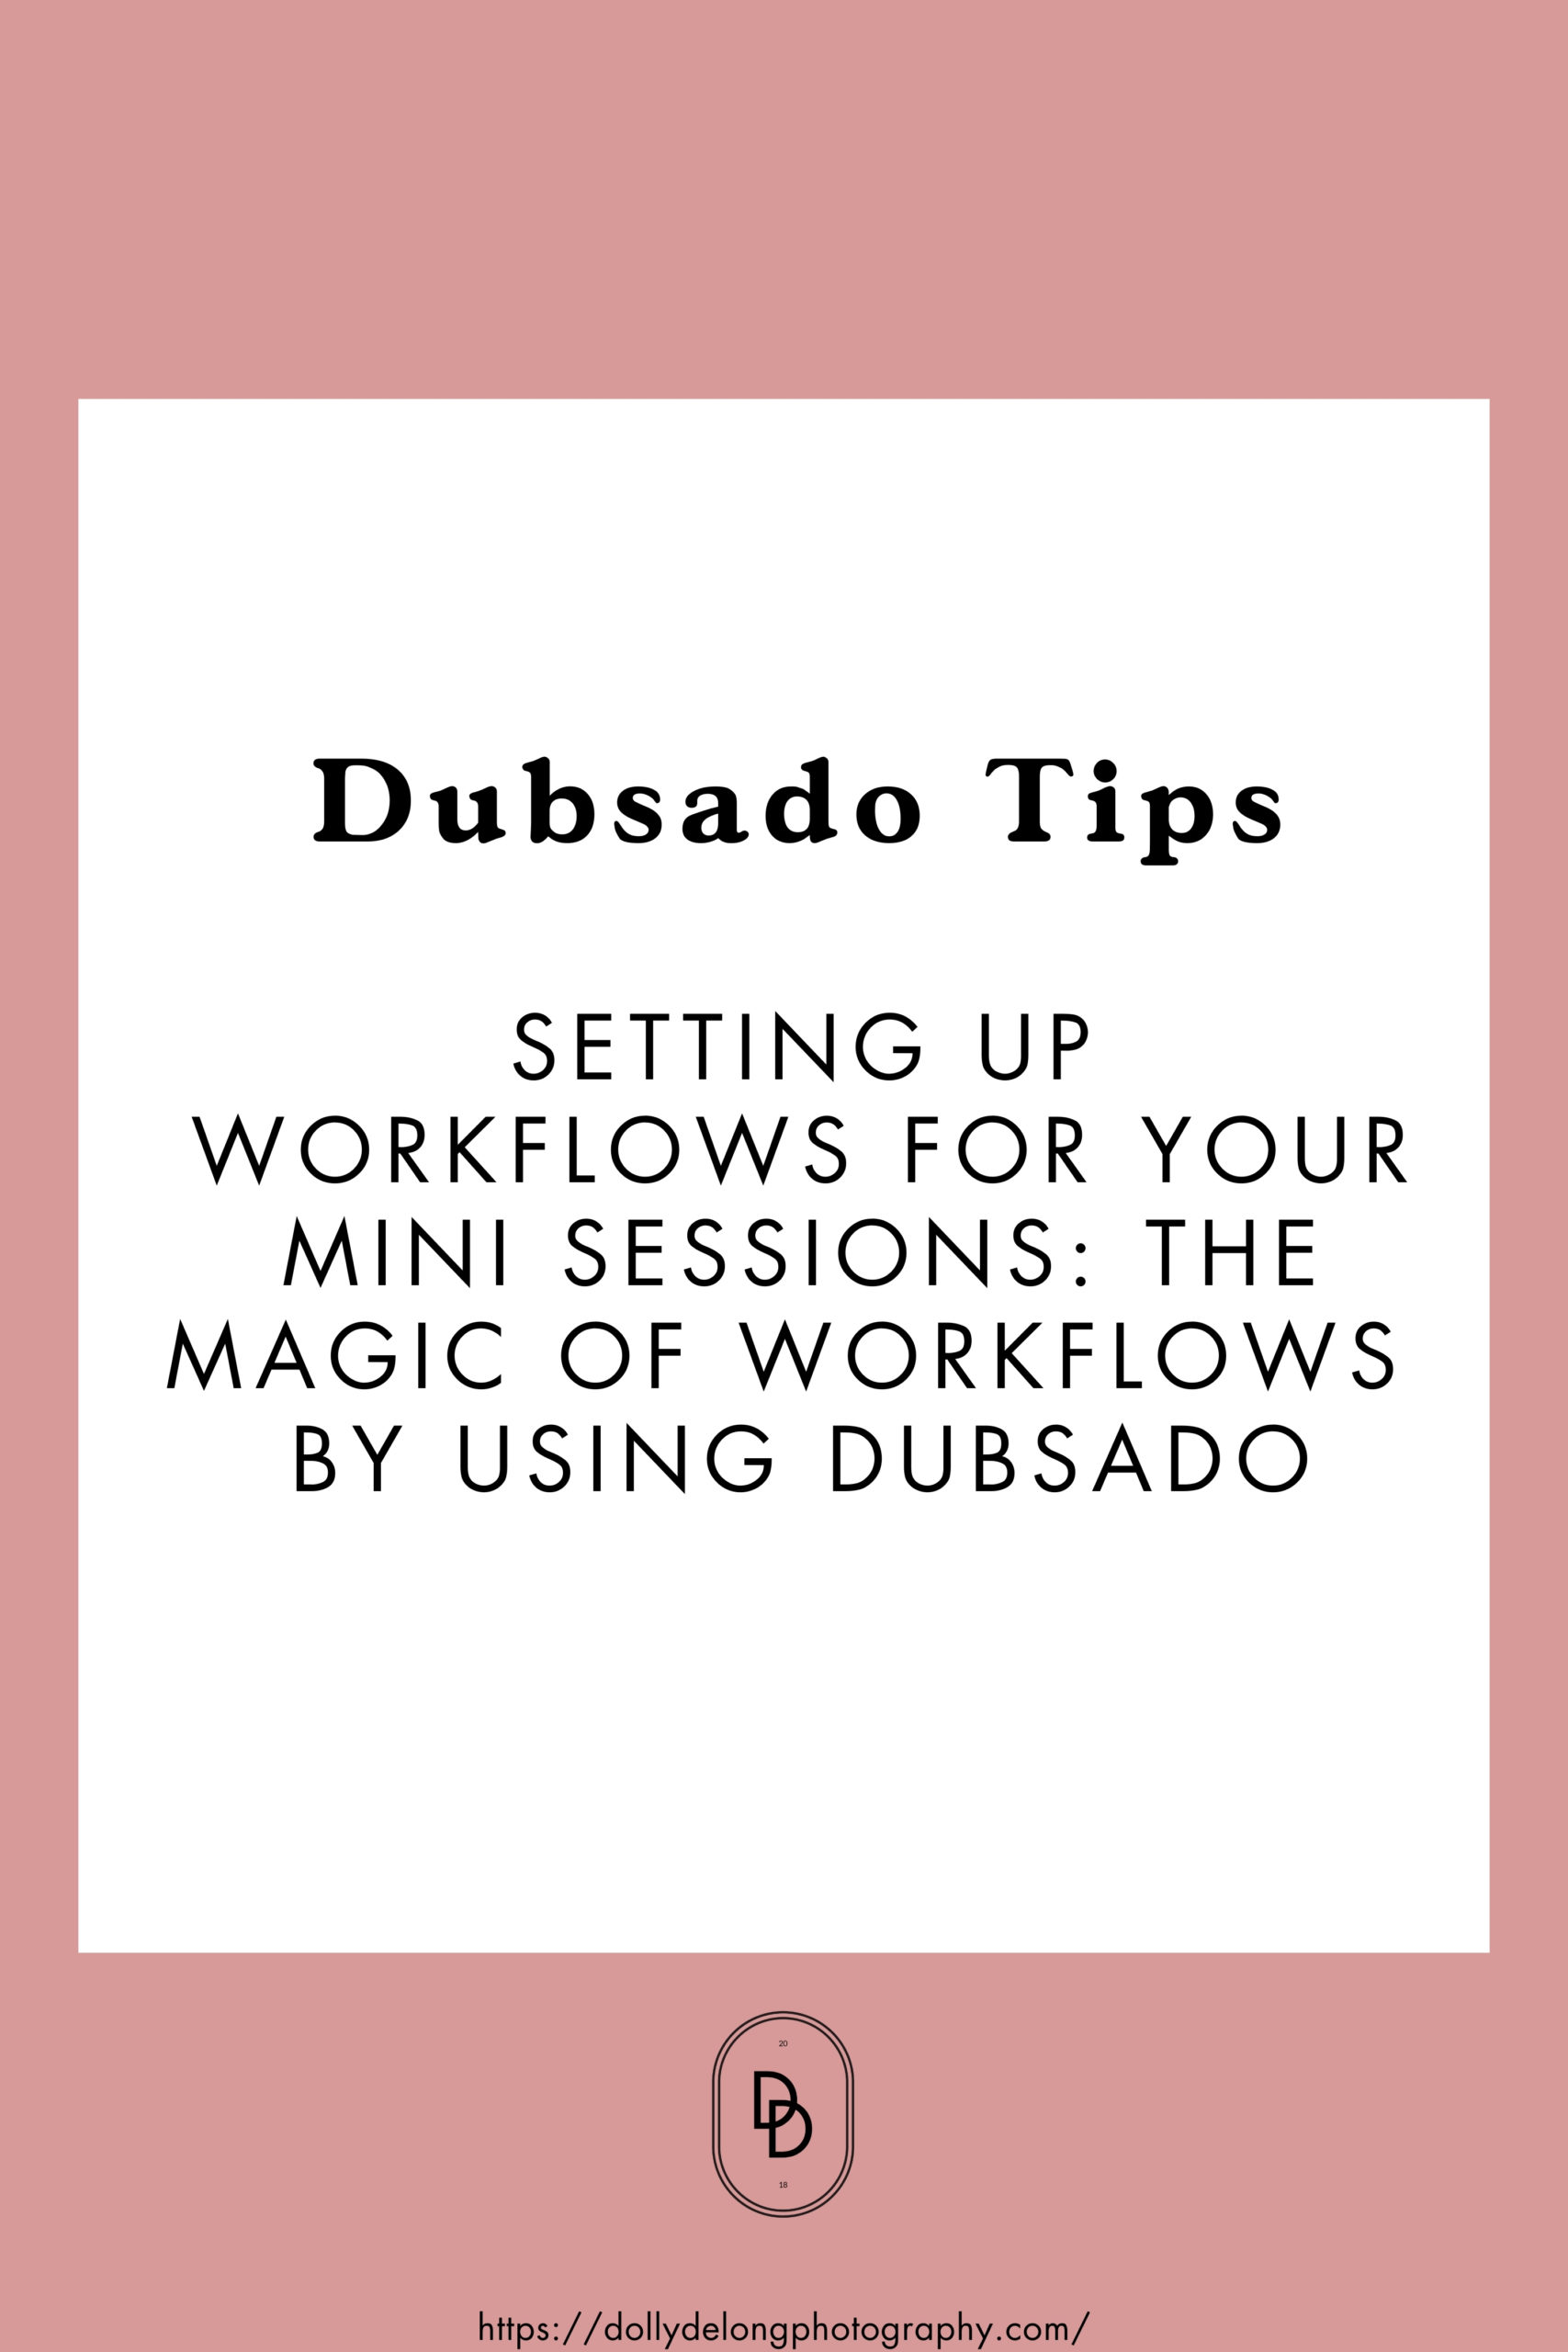 How_to_set_up_mini_Sessions_and_Workflows_using_Dubsado_Pinterest_Pin_Image